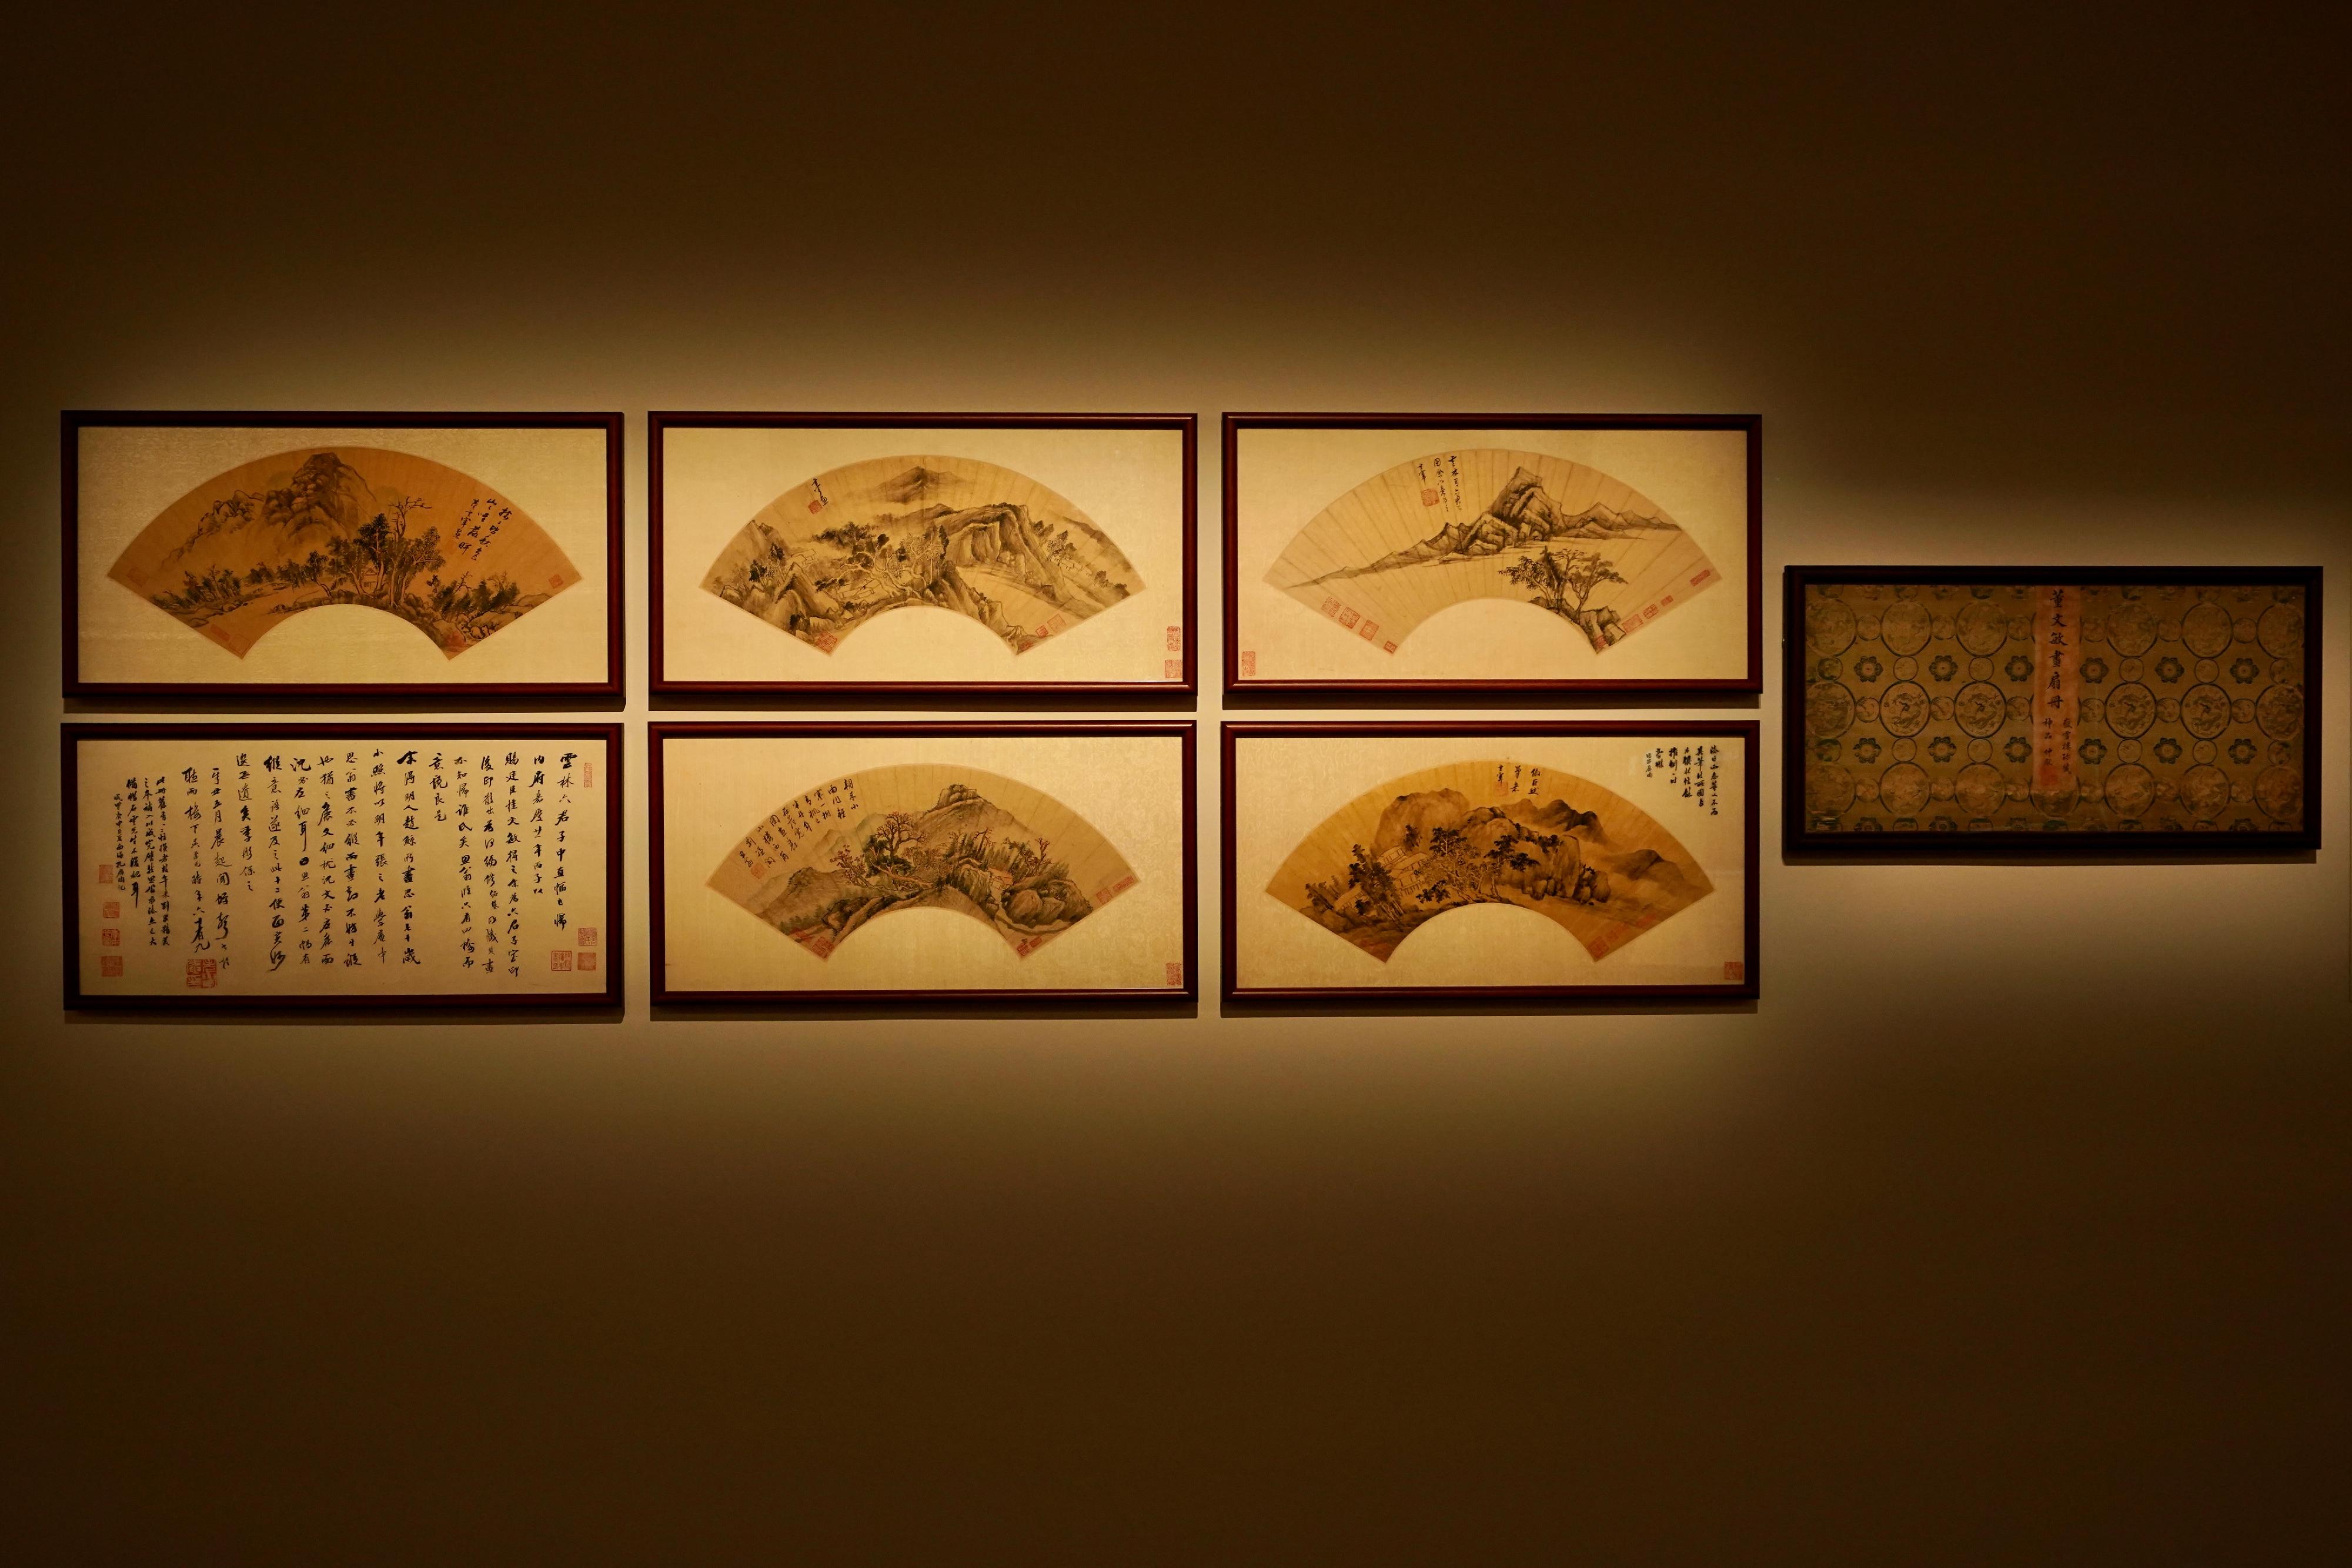 The Hong Kong Museum of Art will launch a new exhibition, "The Connoisseurship and Collection of the Master of Chih Lo Lou", tomorrow (December 9) highlighting memorable personal stories of the late Hong Kong collector Ho Iu-kwong, as well as his insights into the authentication and appreciation of Chinese painting and calligraphy. Photo shows "Landscapes" by Ming dynasty artist Dong Qichang.